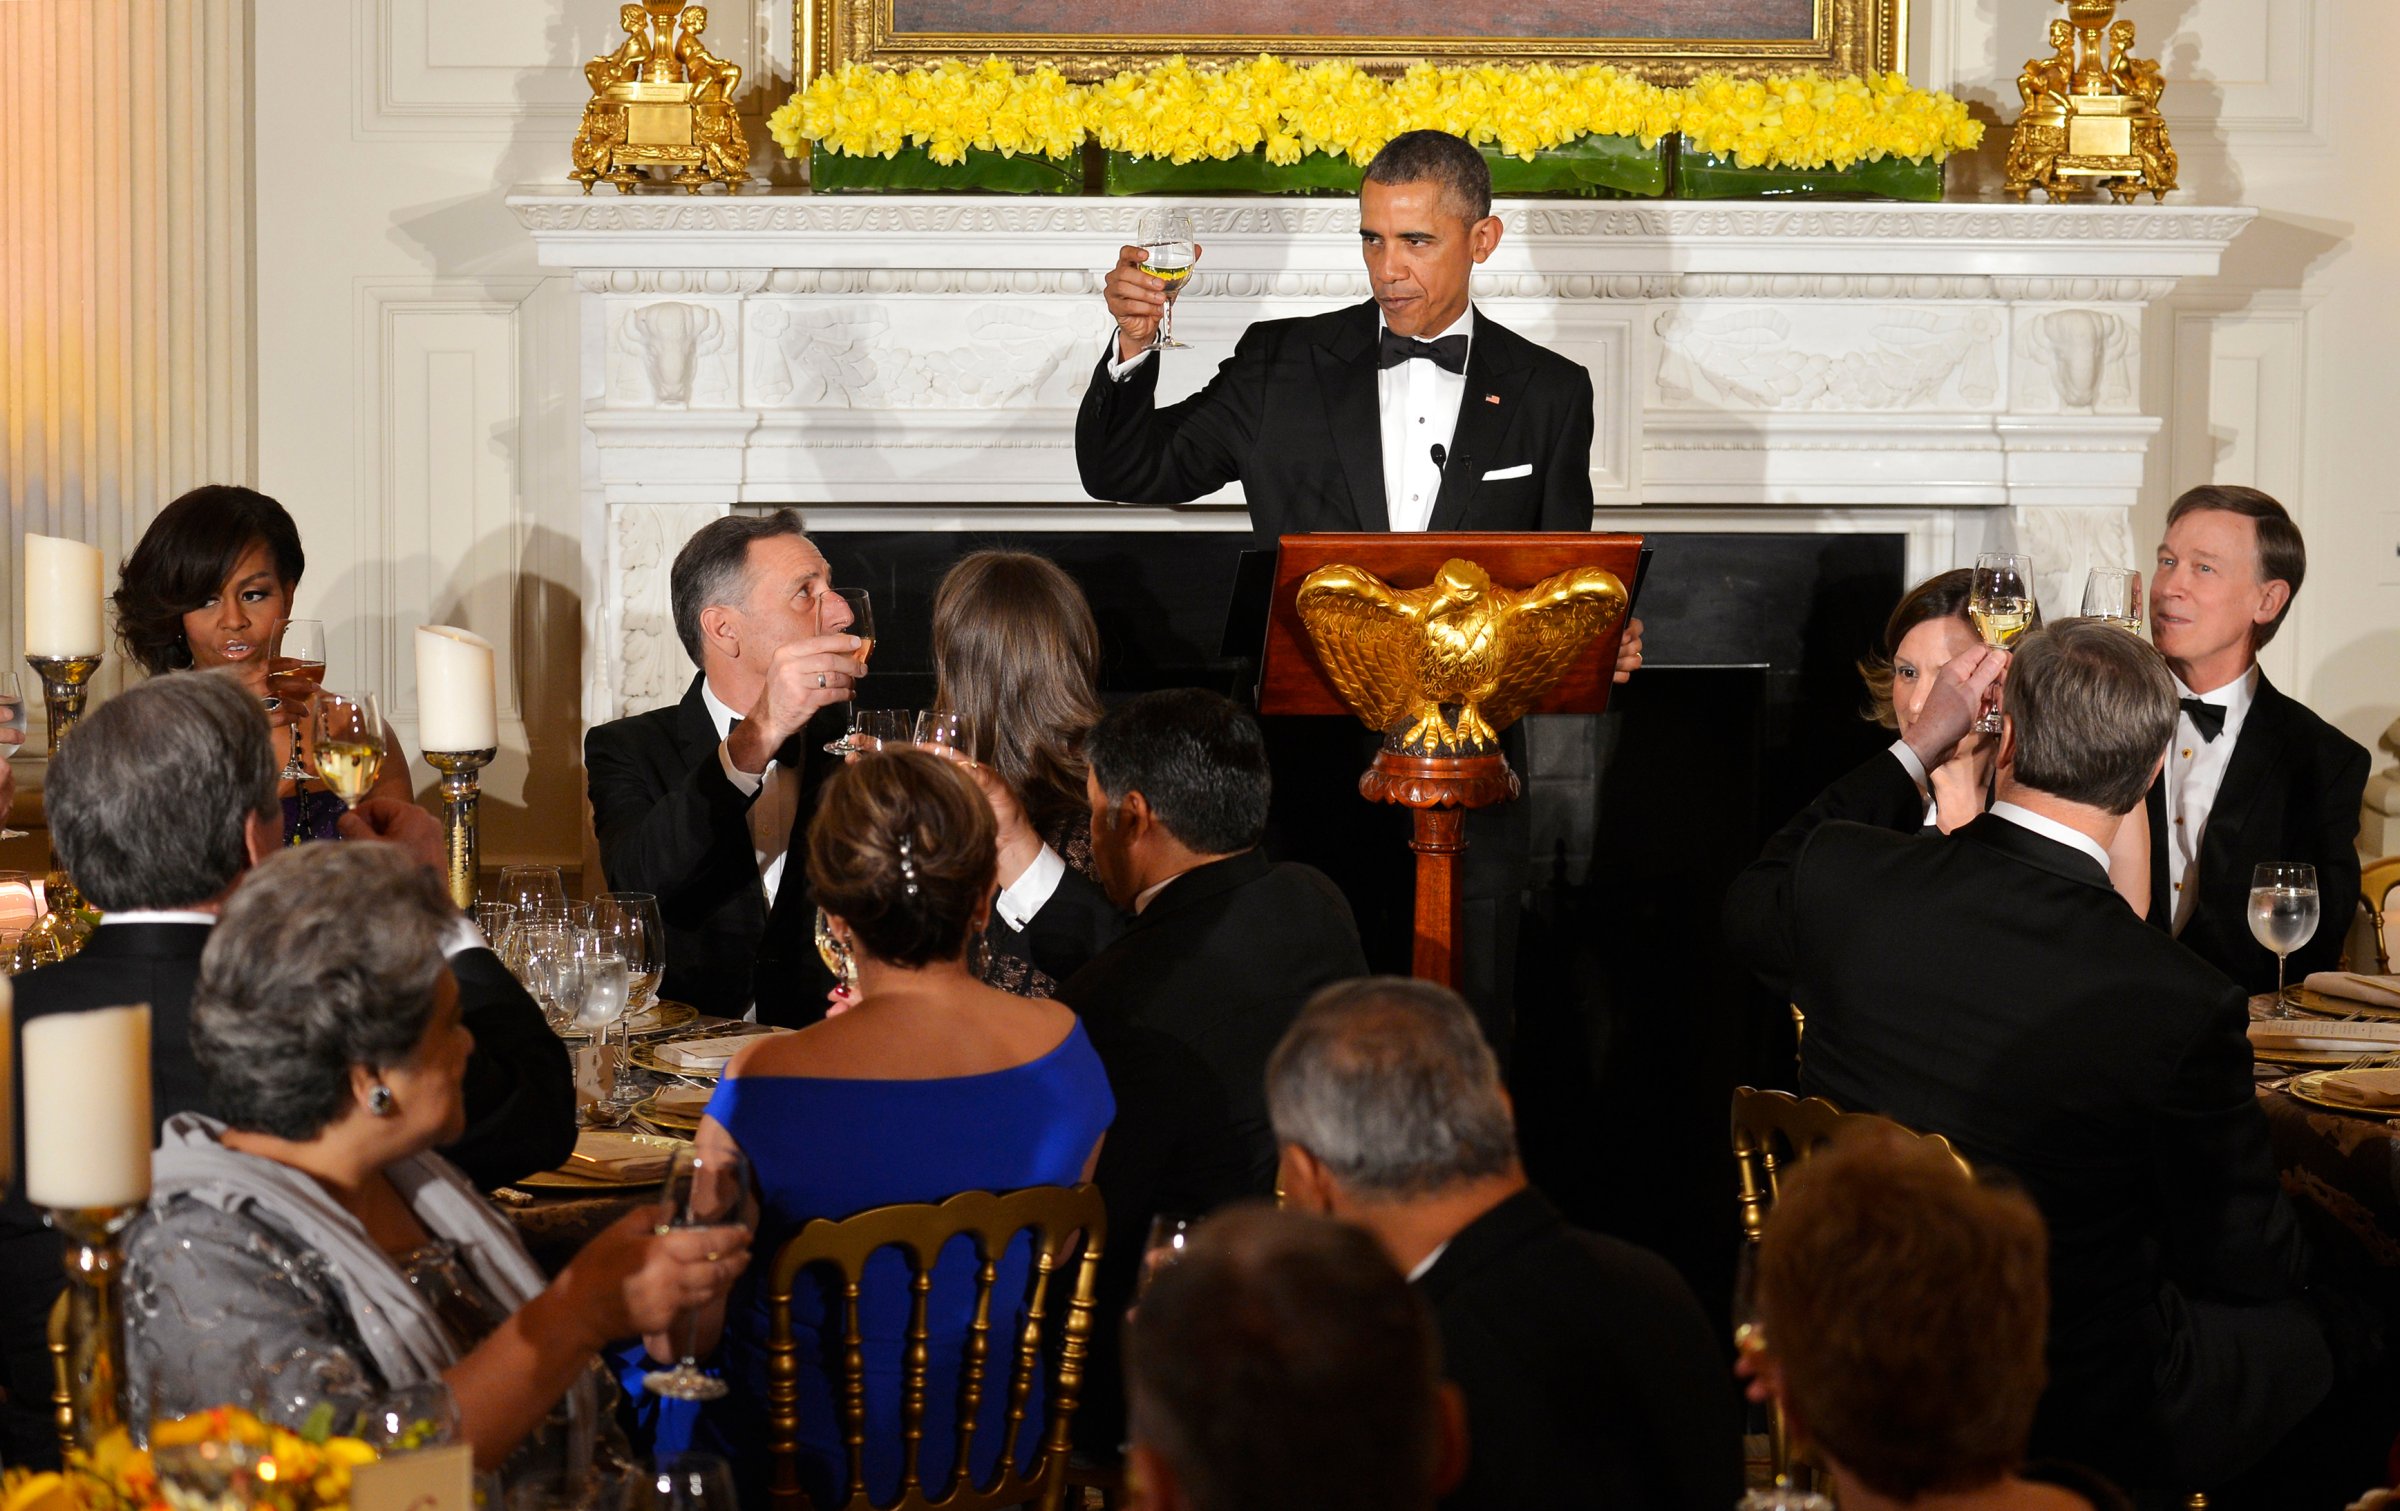 U.S. President Barack Obama toasts attendees from the National Governors Association at a dinner in the White House